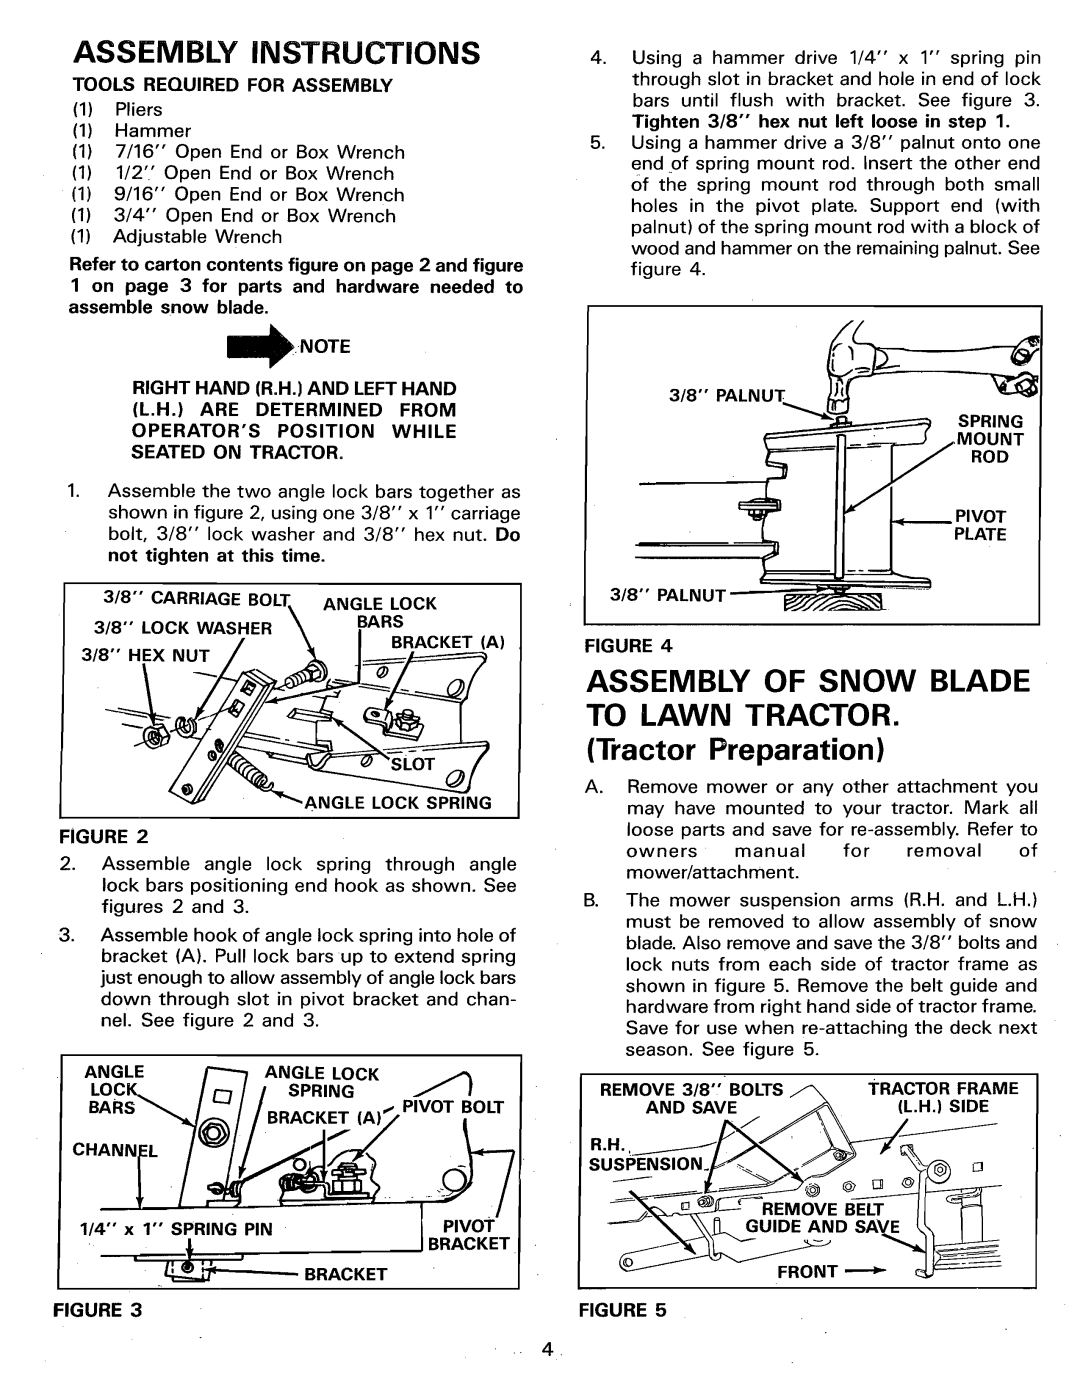 Sears 486.244062 MouNT, Assembly Instructions, Assembly Of Snow Blade To Lawn Tractor, Tractor Preparation, LocK, > 